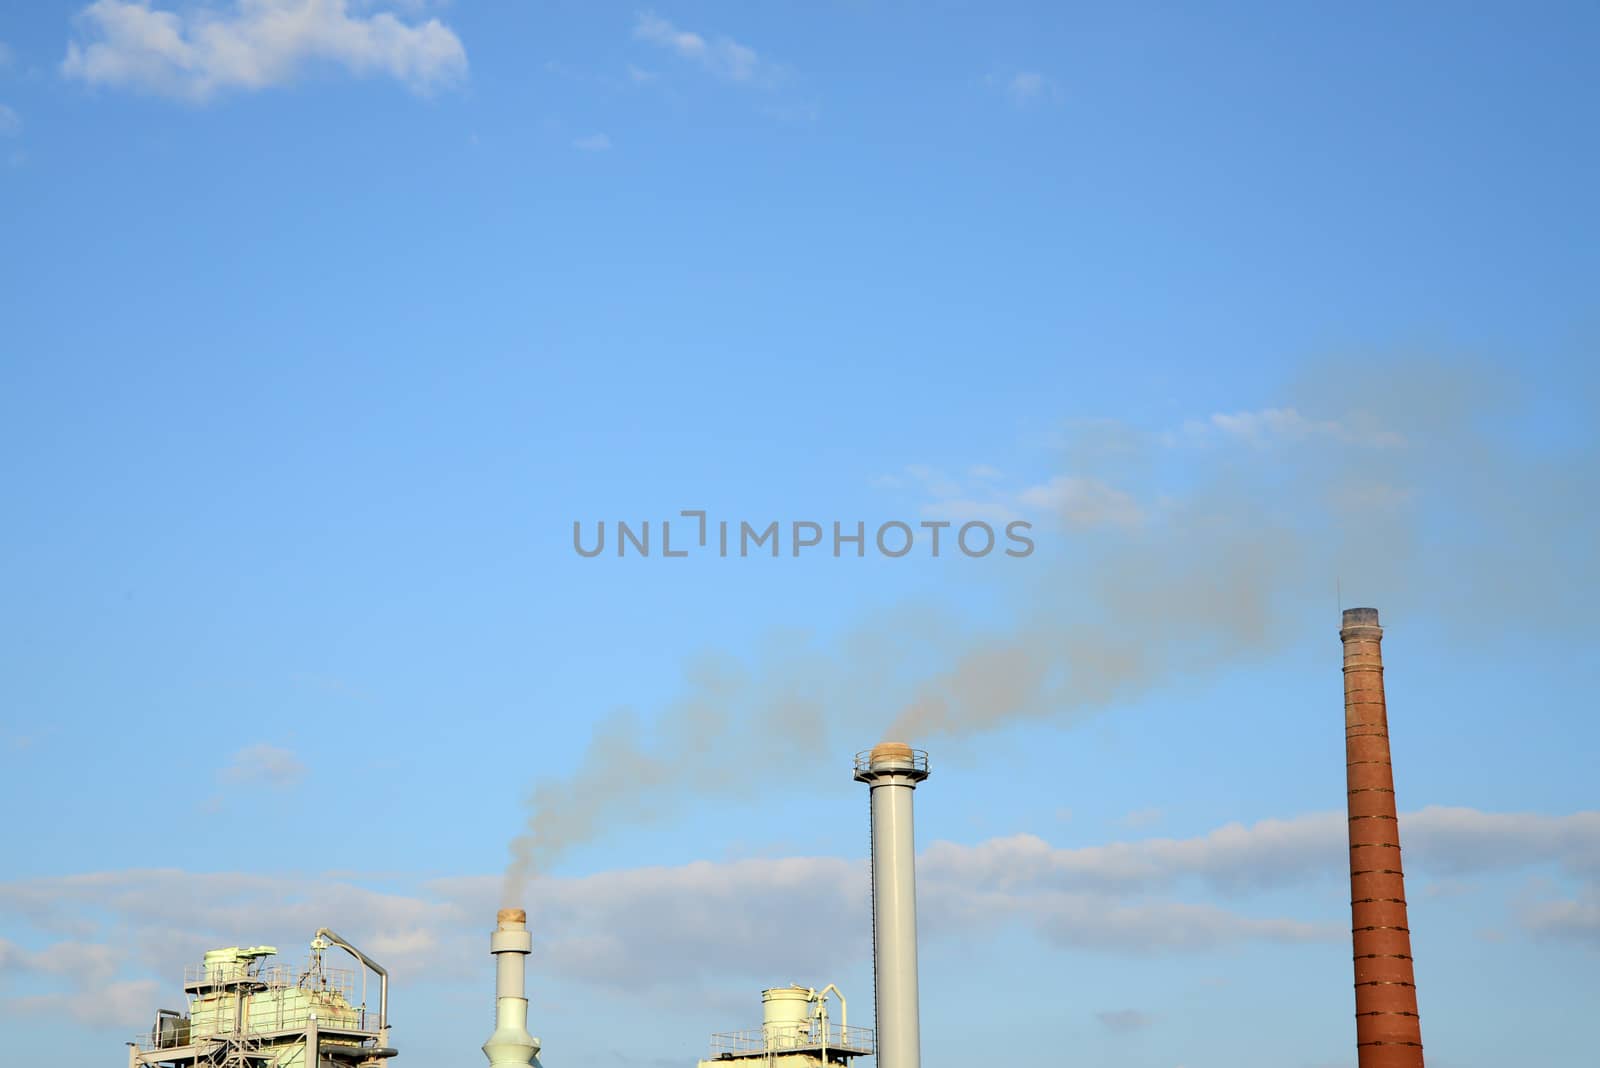 Photo of industrial smoke from chimneys on a blue sky. Illustration of industrial pollution, environmental problems.
Taken in Riga, Latvia.